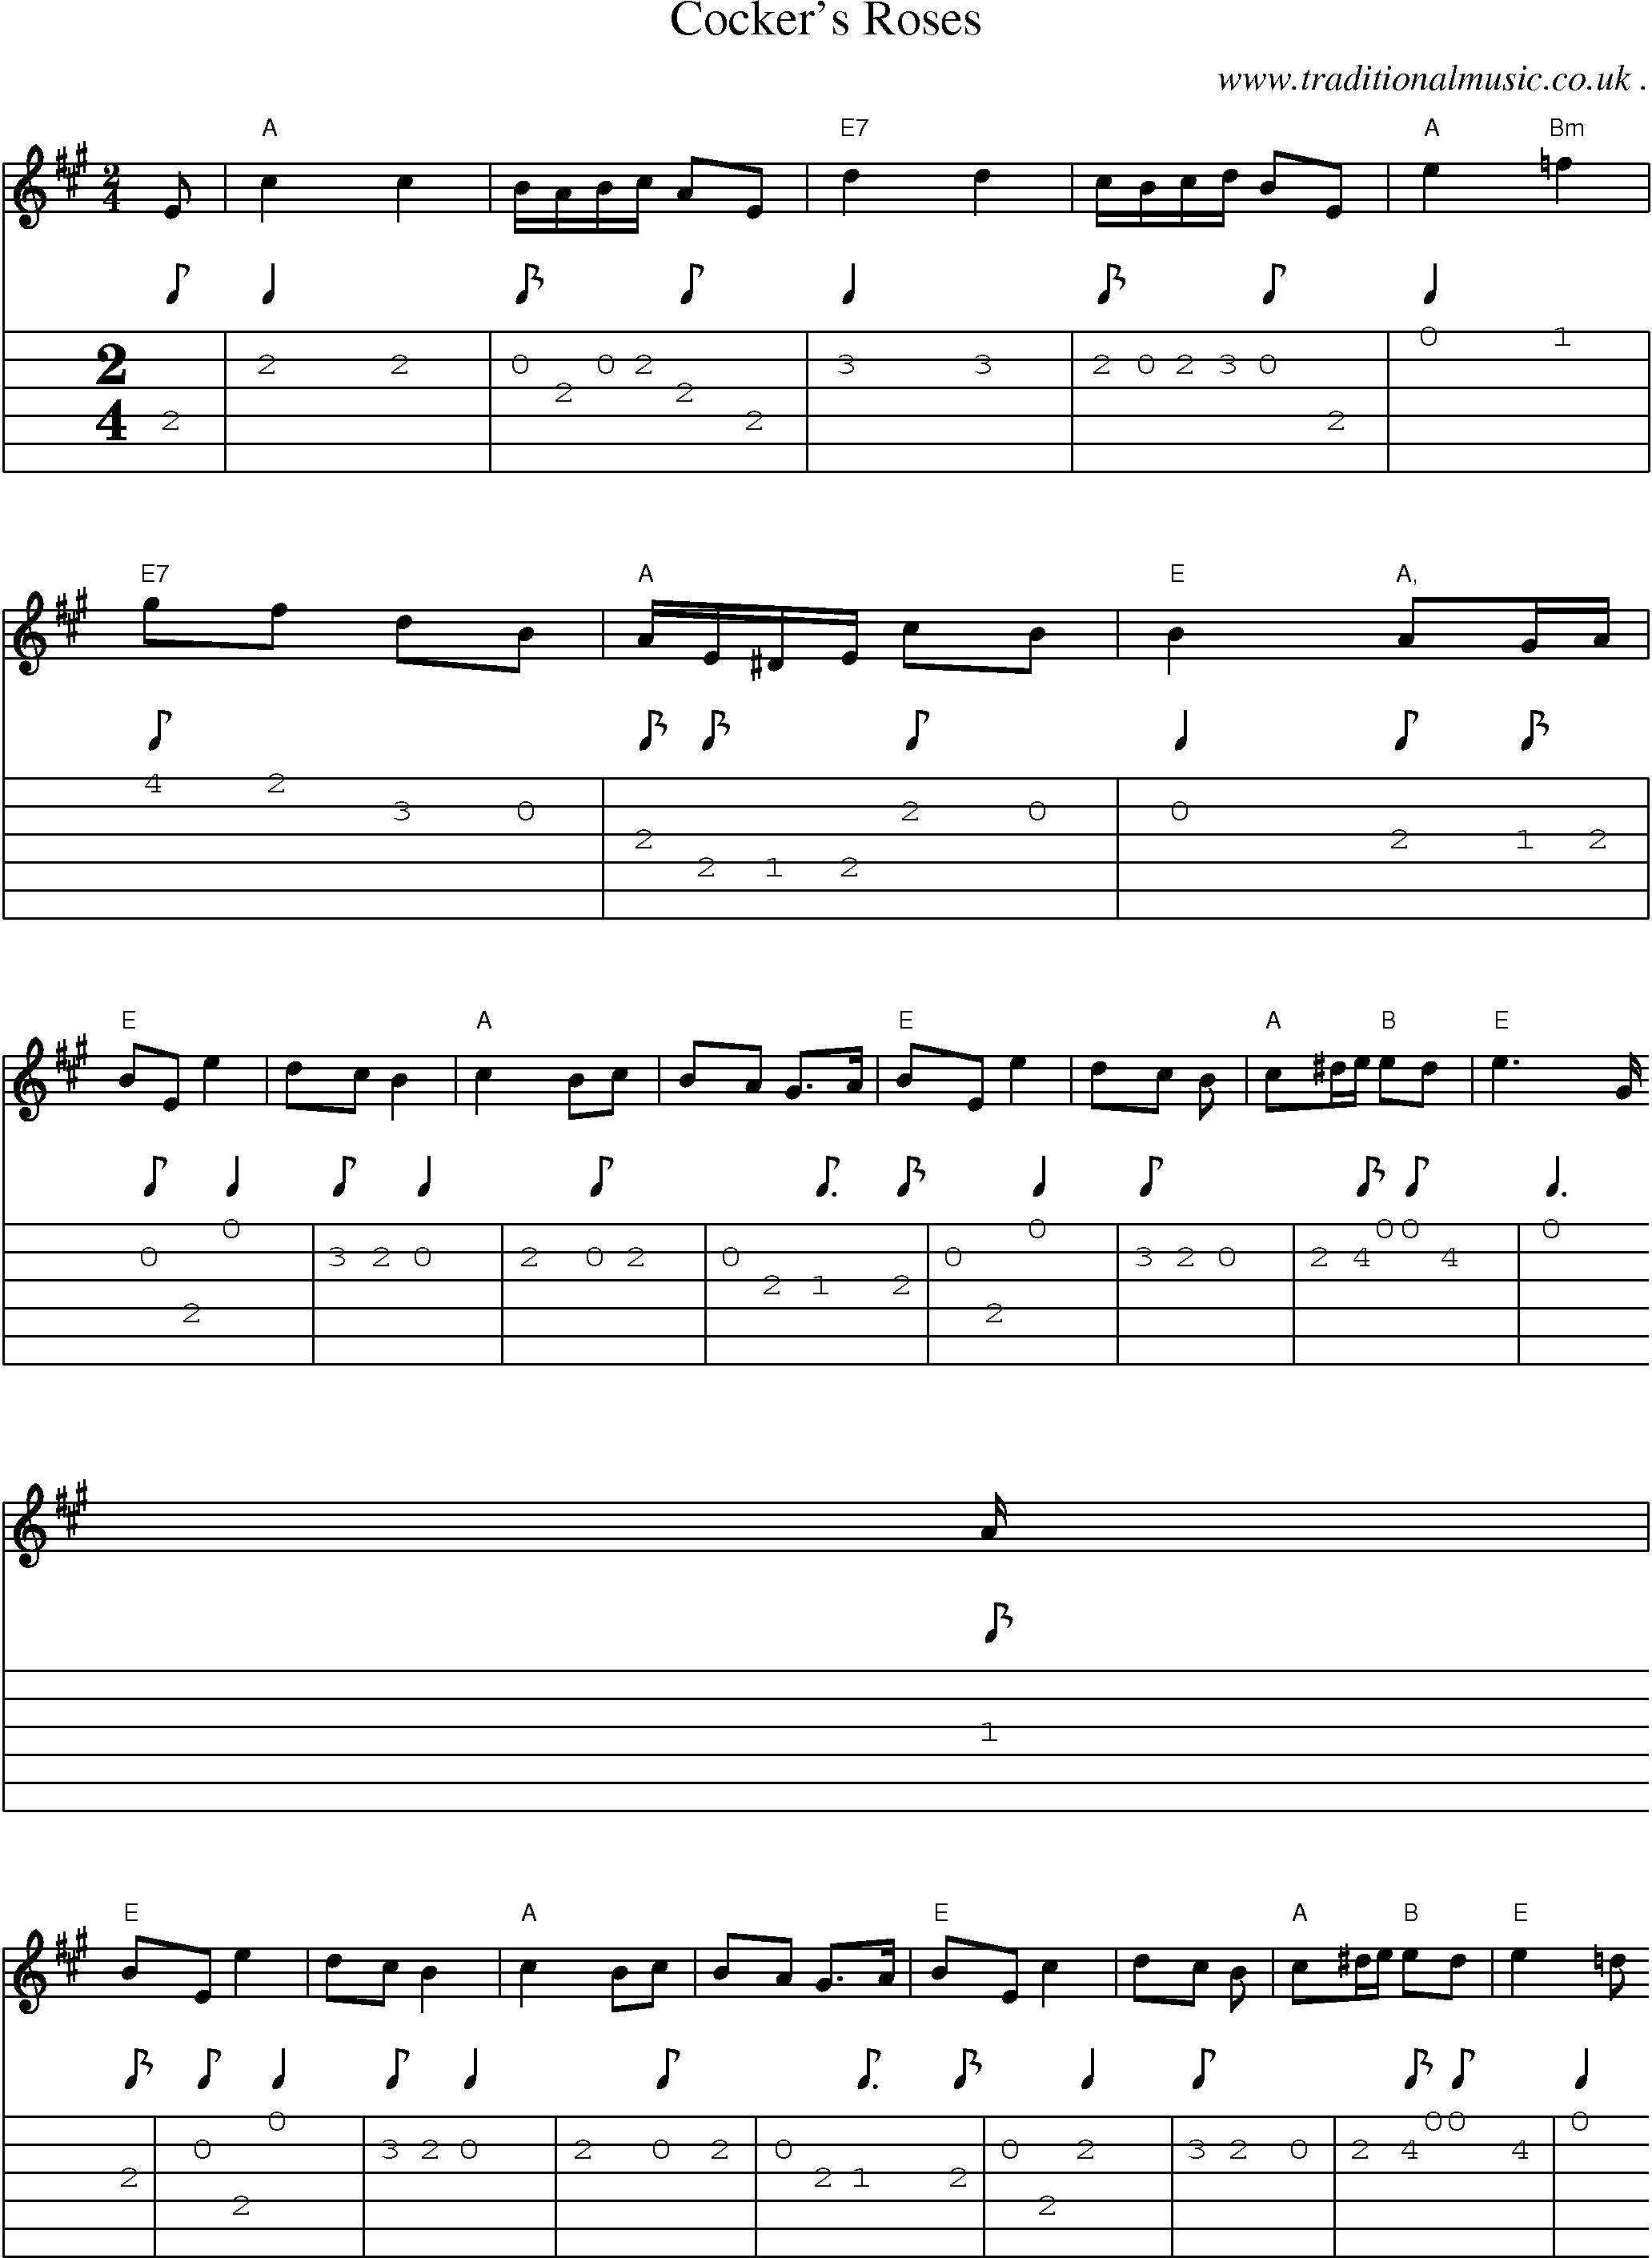 Sheet-music  score, Chords and Guitar Tabs for Cockers Roses